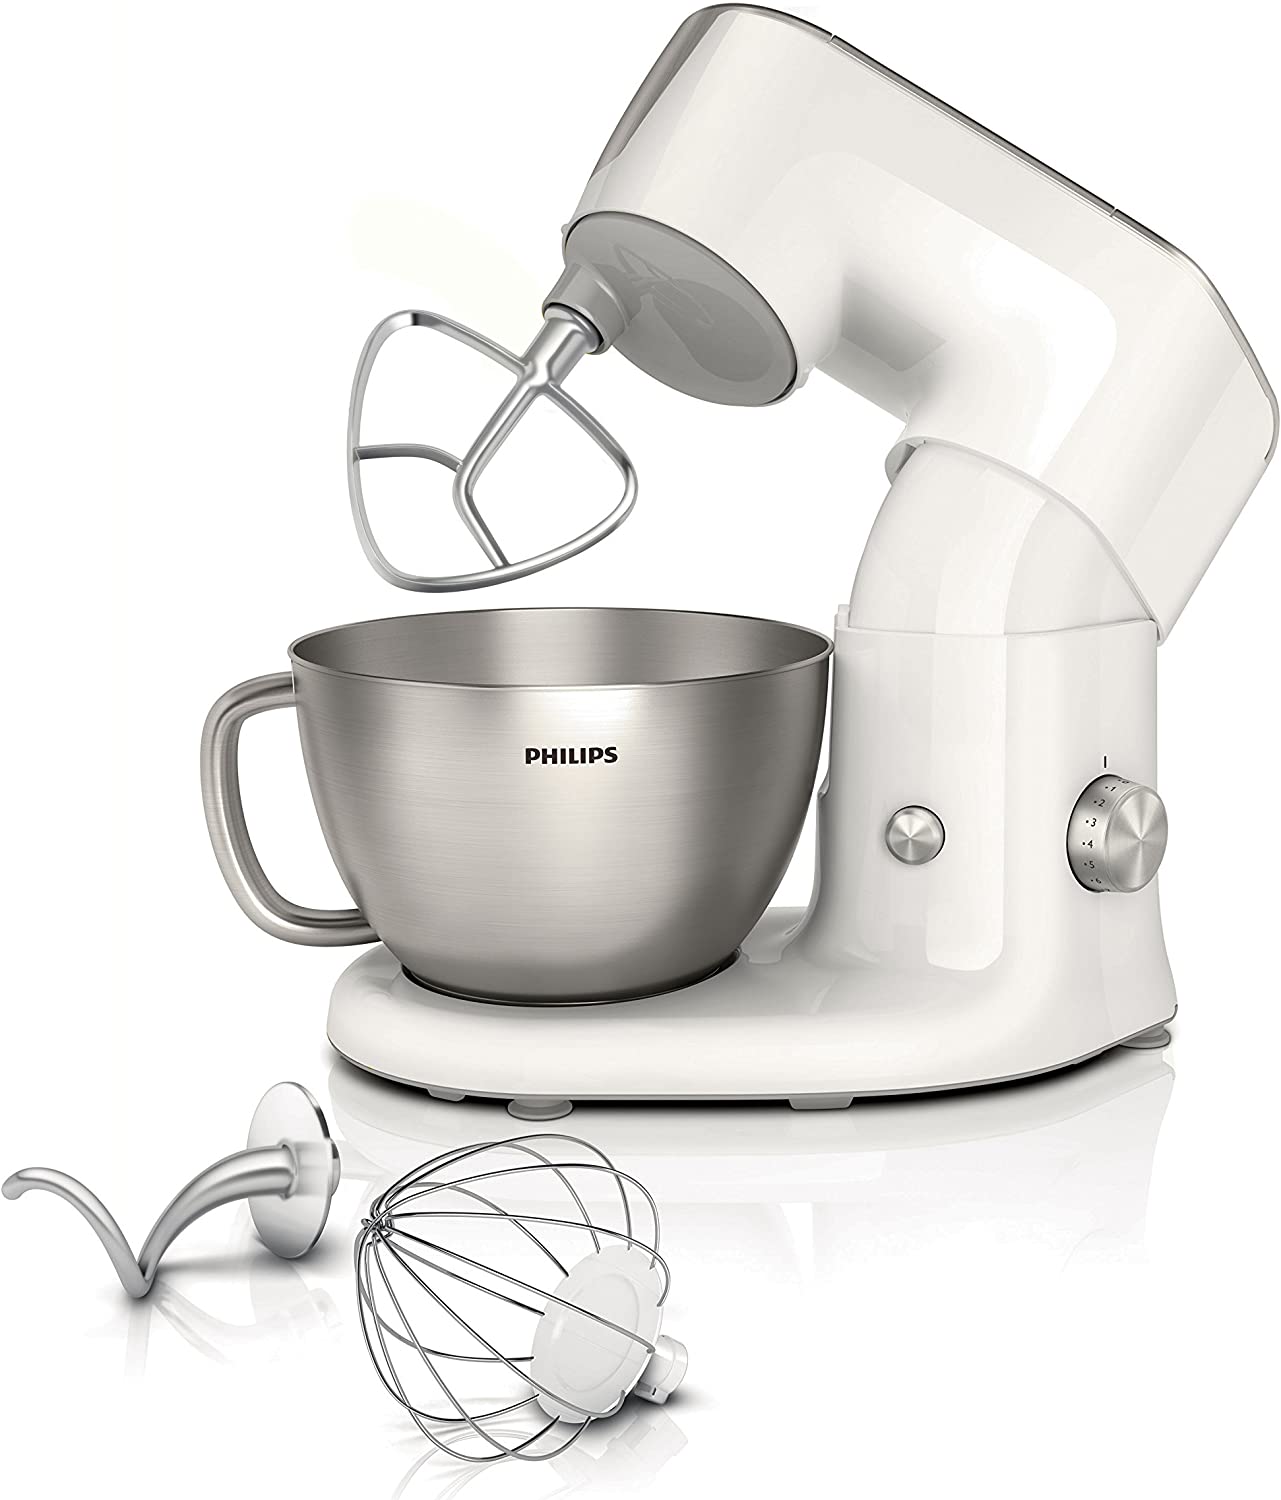 Philips HR7951/00 Food Processor Blender and Baking Set White and gray